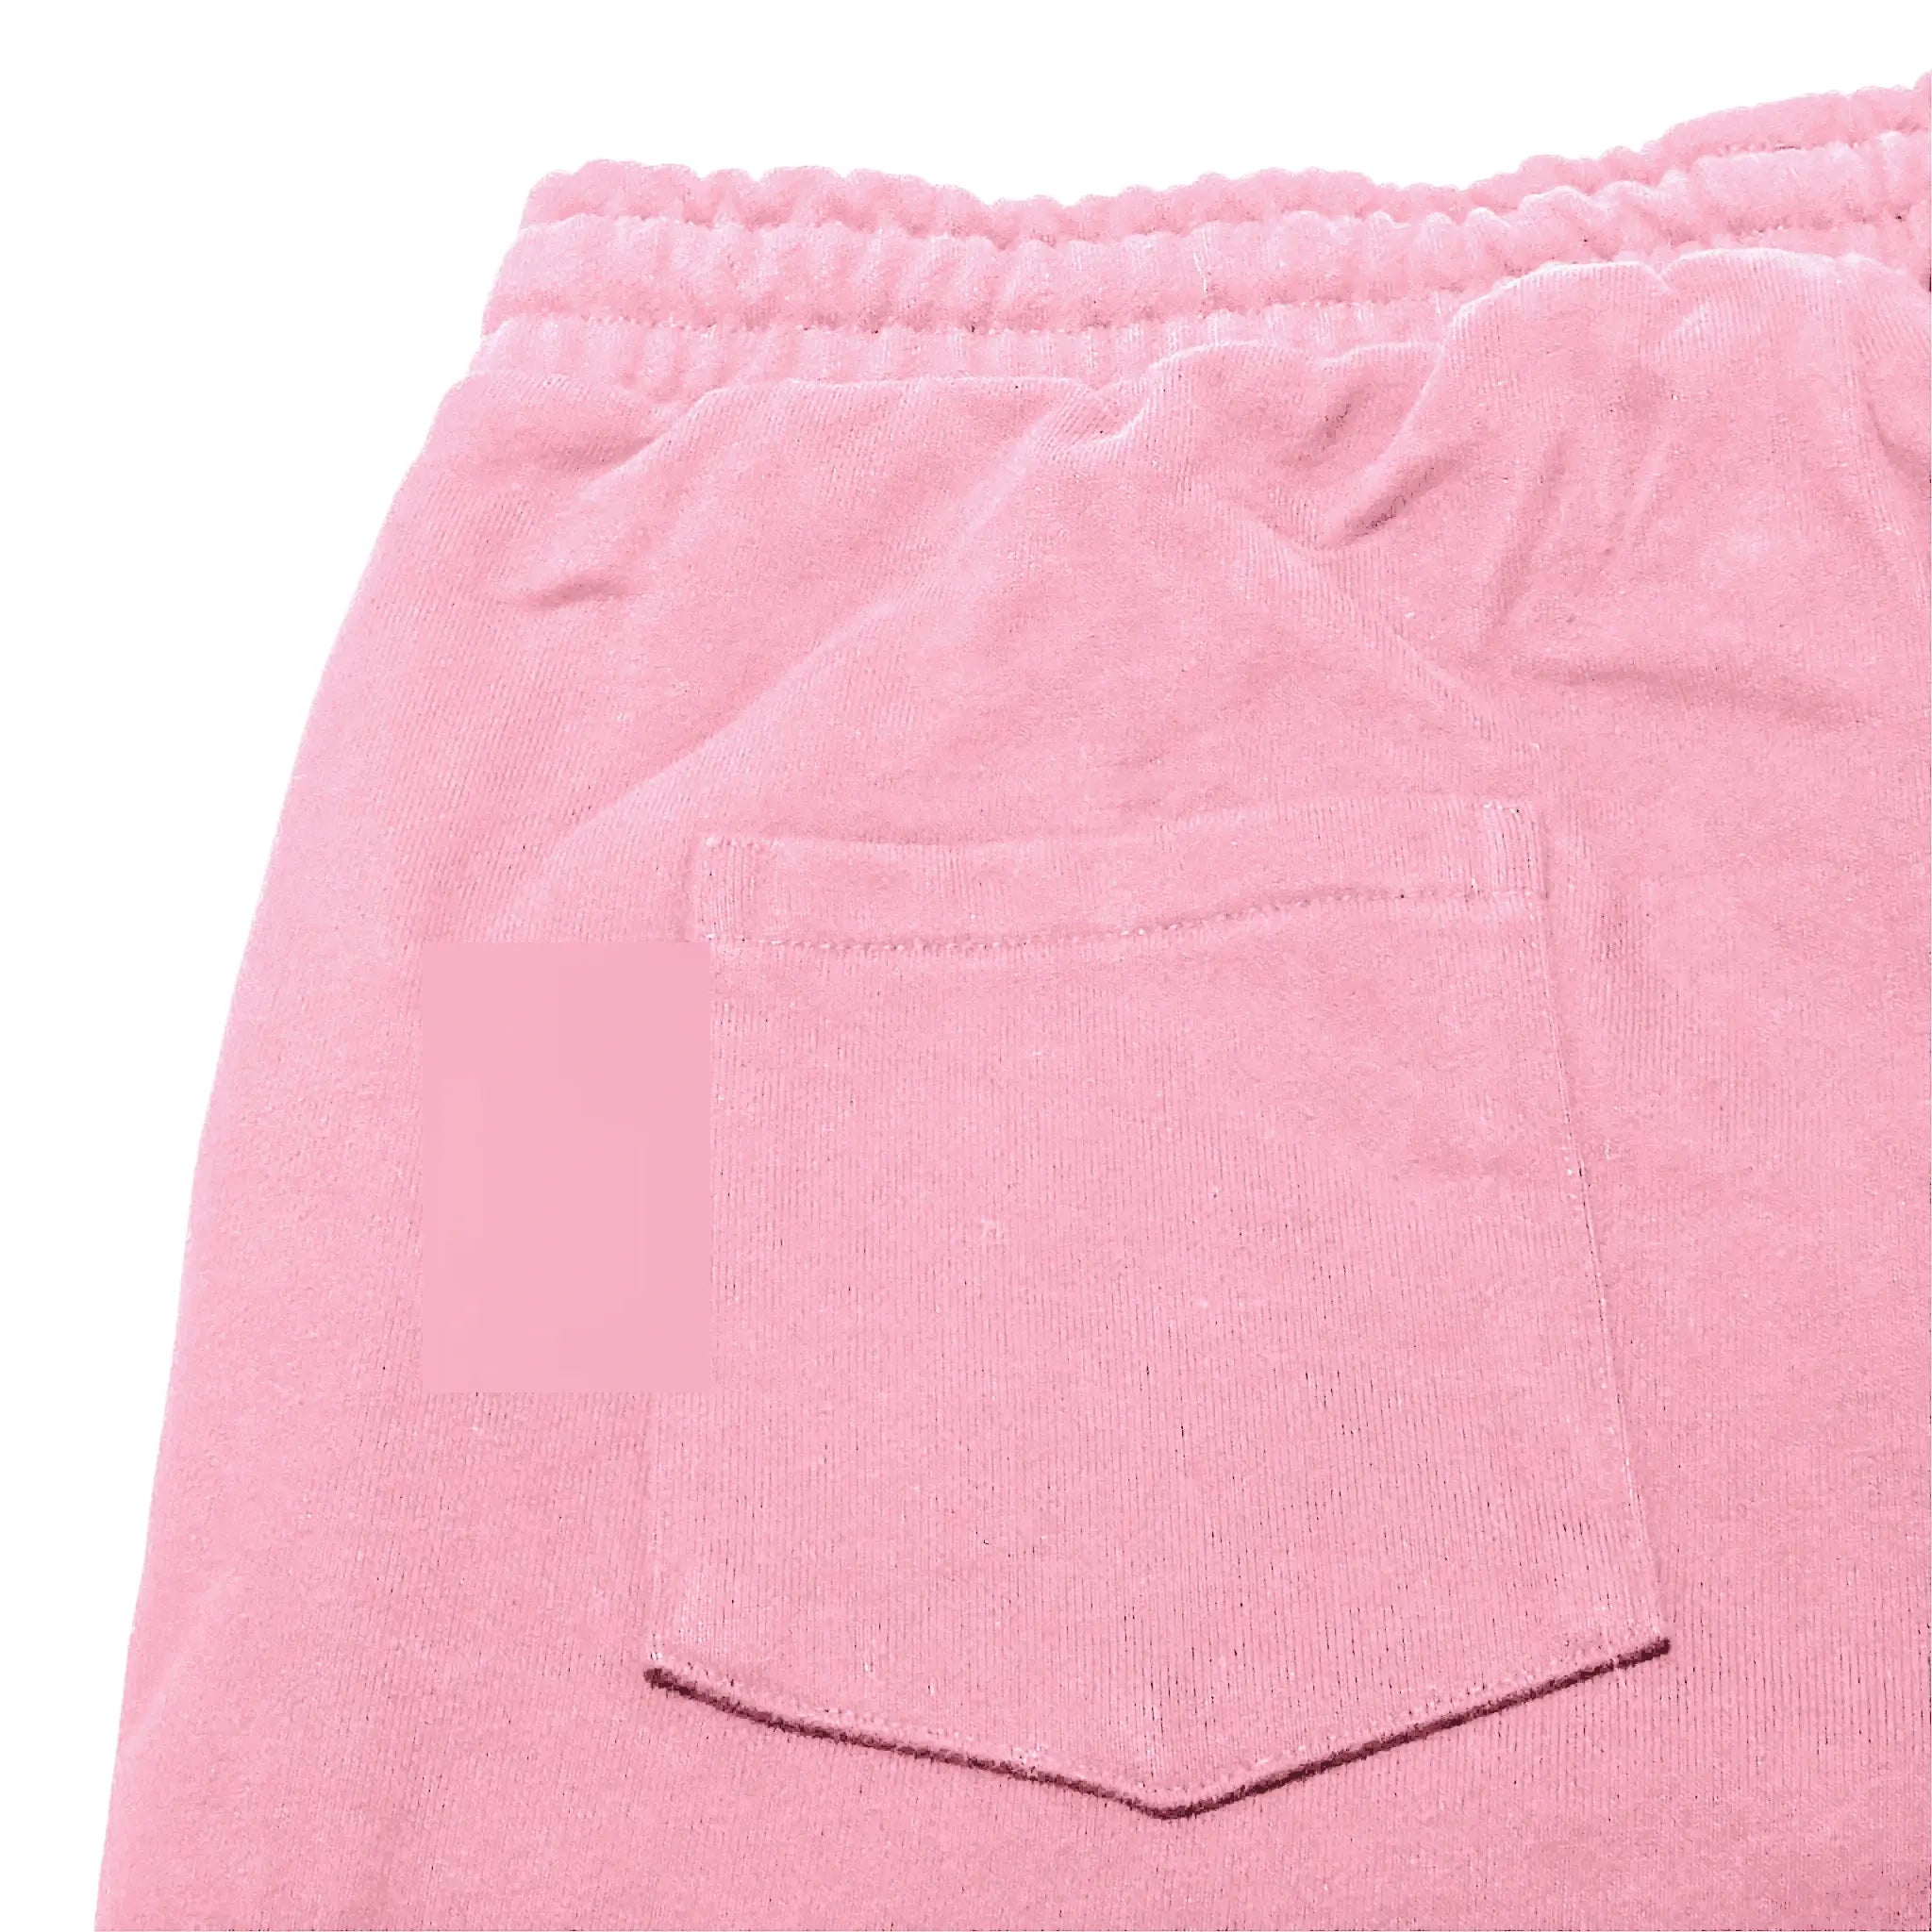 Pocket view of Carsicko London Pink Hoodie